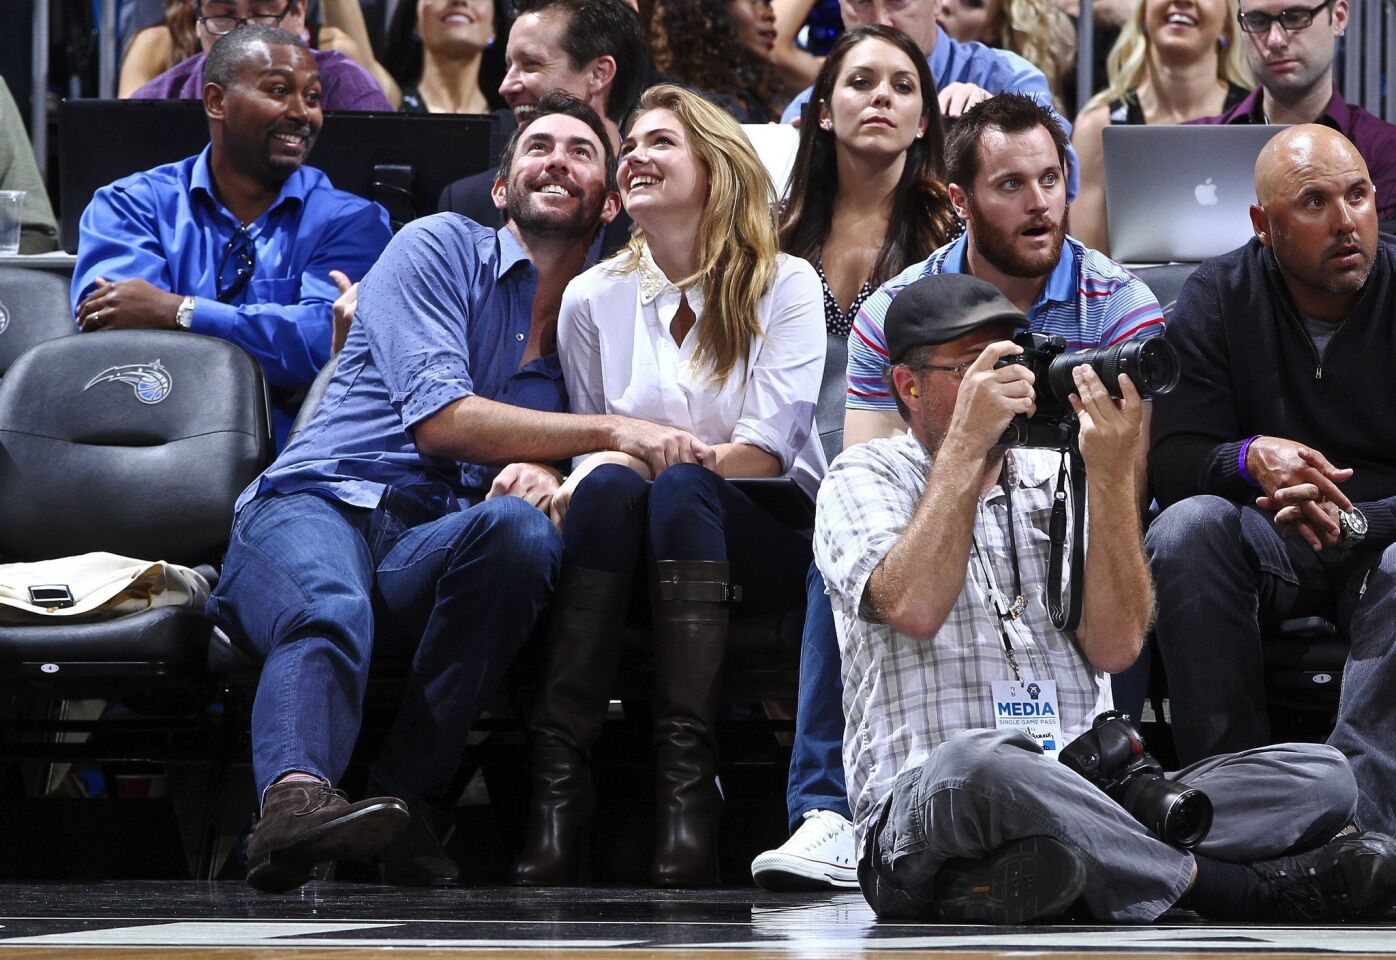 Upton's rumored boyfriend, Detroit Tigers pitcher Justin Verlander, joins her courtside as the Orlando Magic takes on the New York Knicks at the Amway Center.